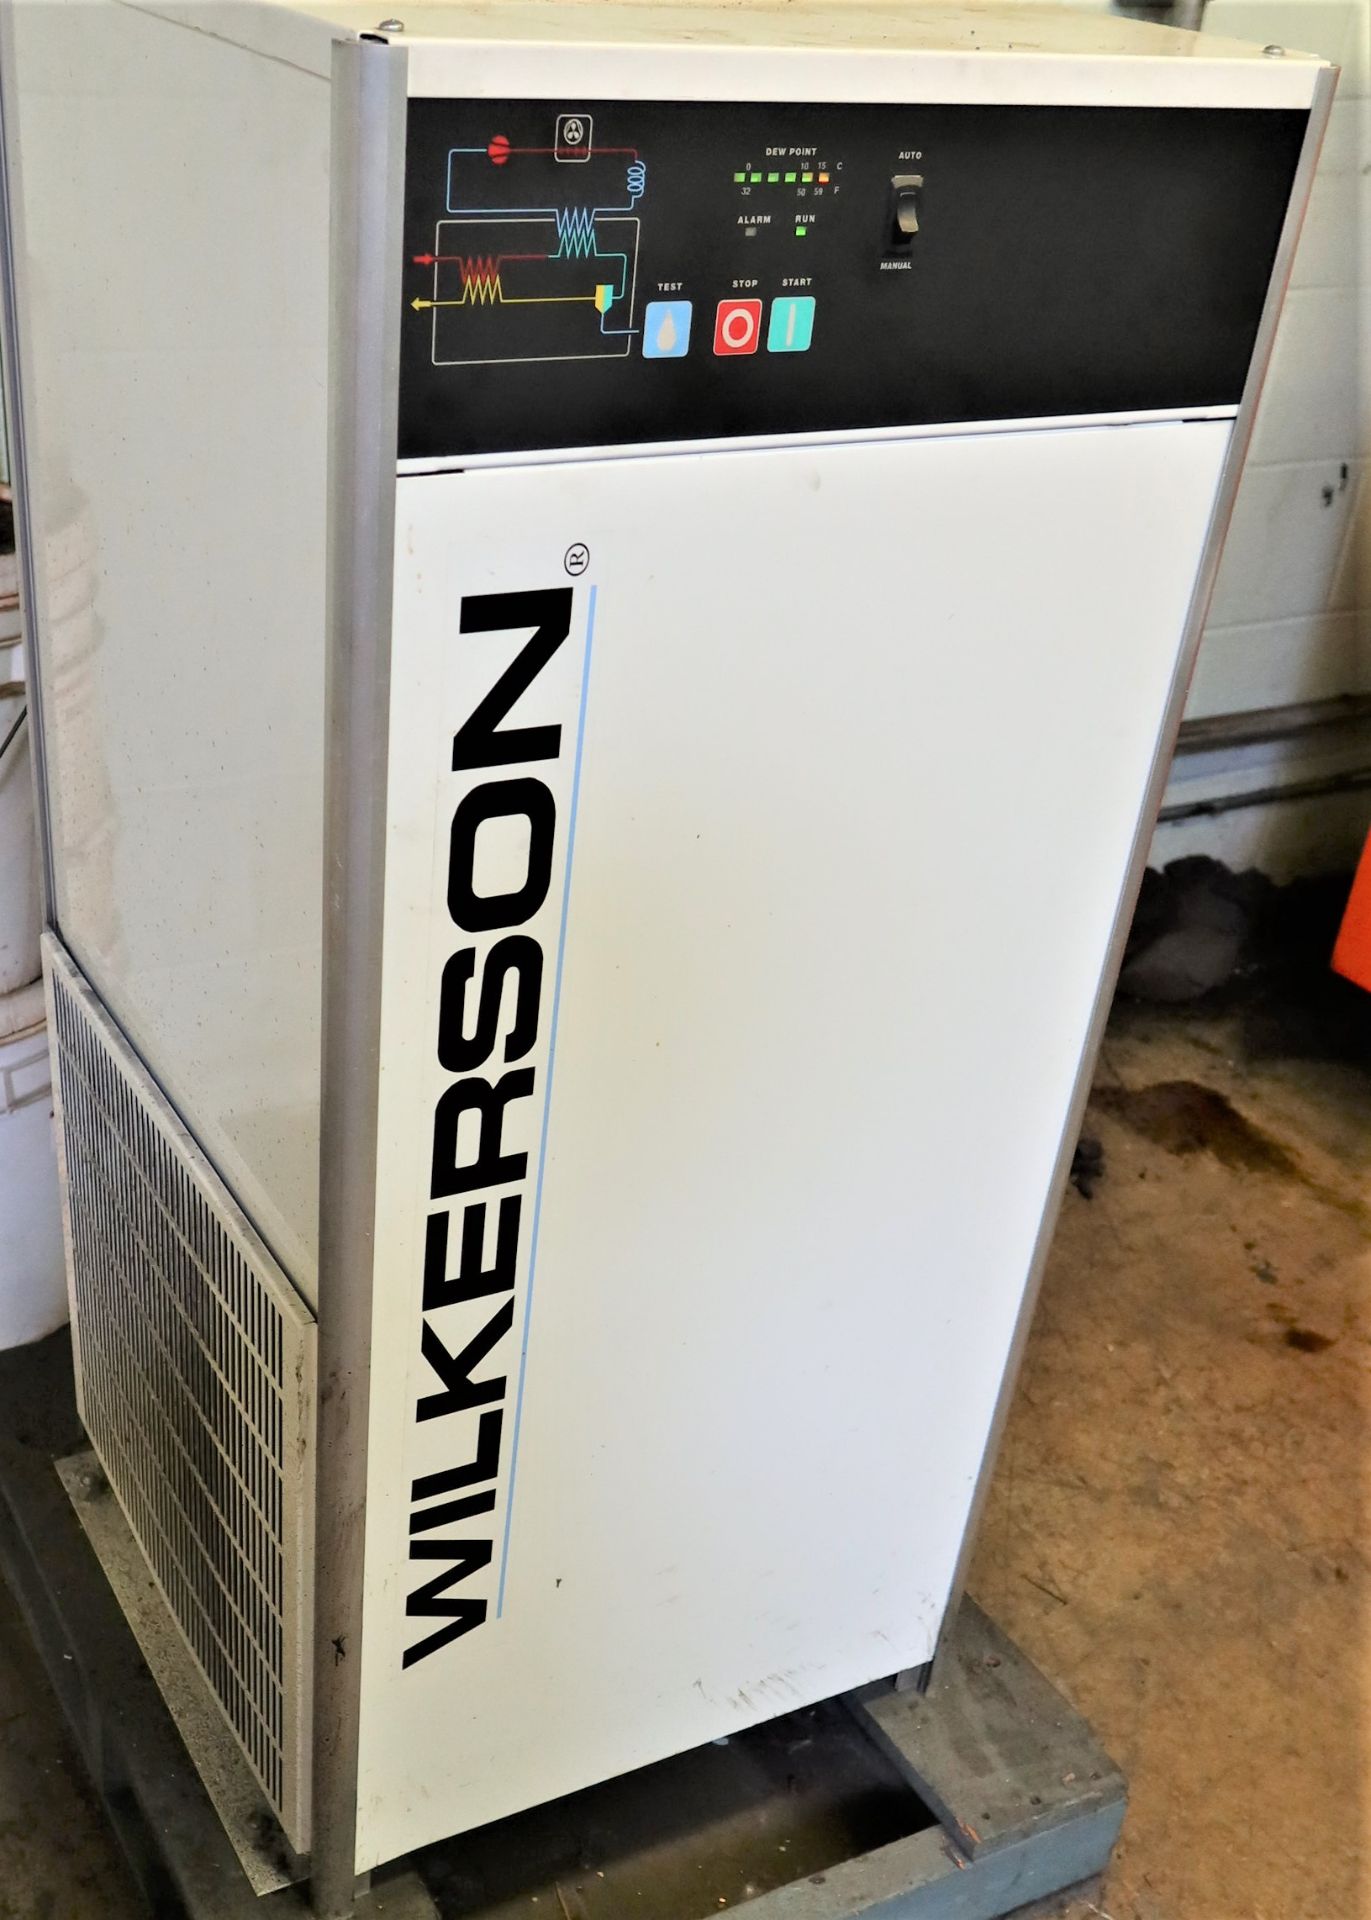 Wilkerson WRD100A-1 Refrigerated Air Dryer, S/N 723-06-02-1999-5823